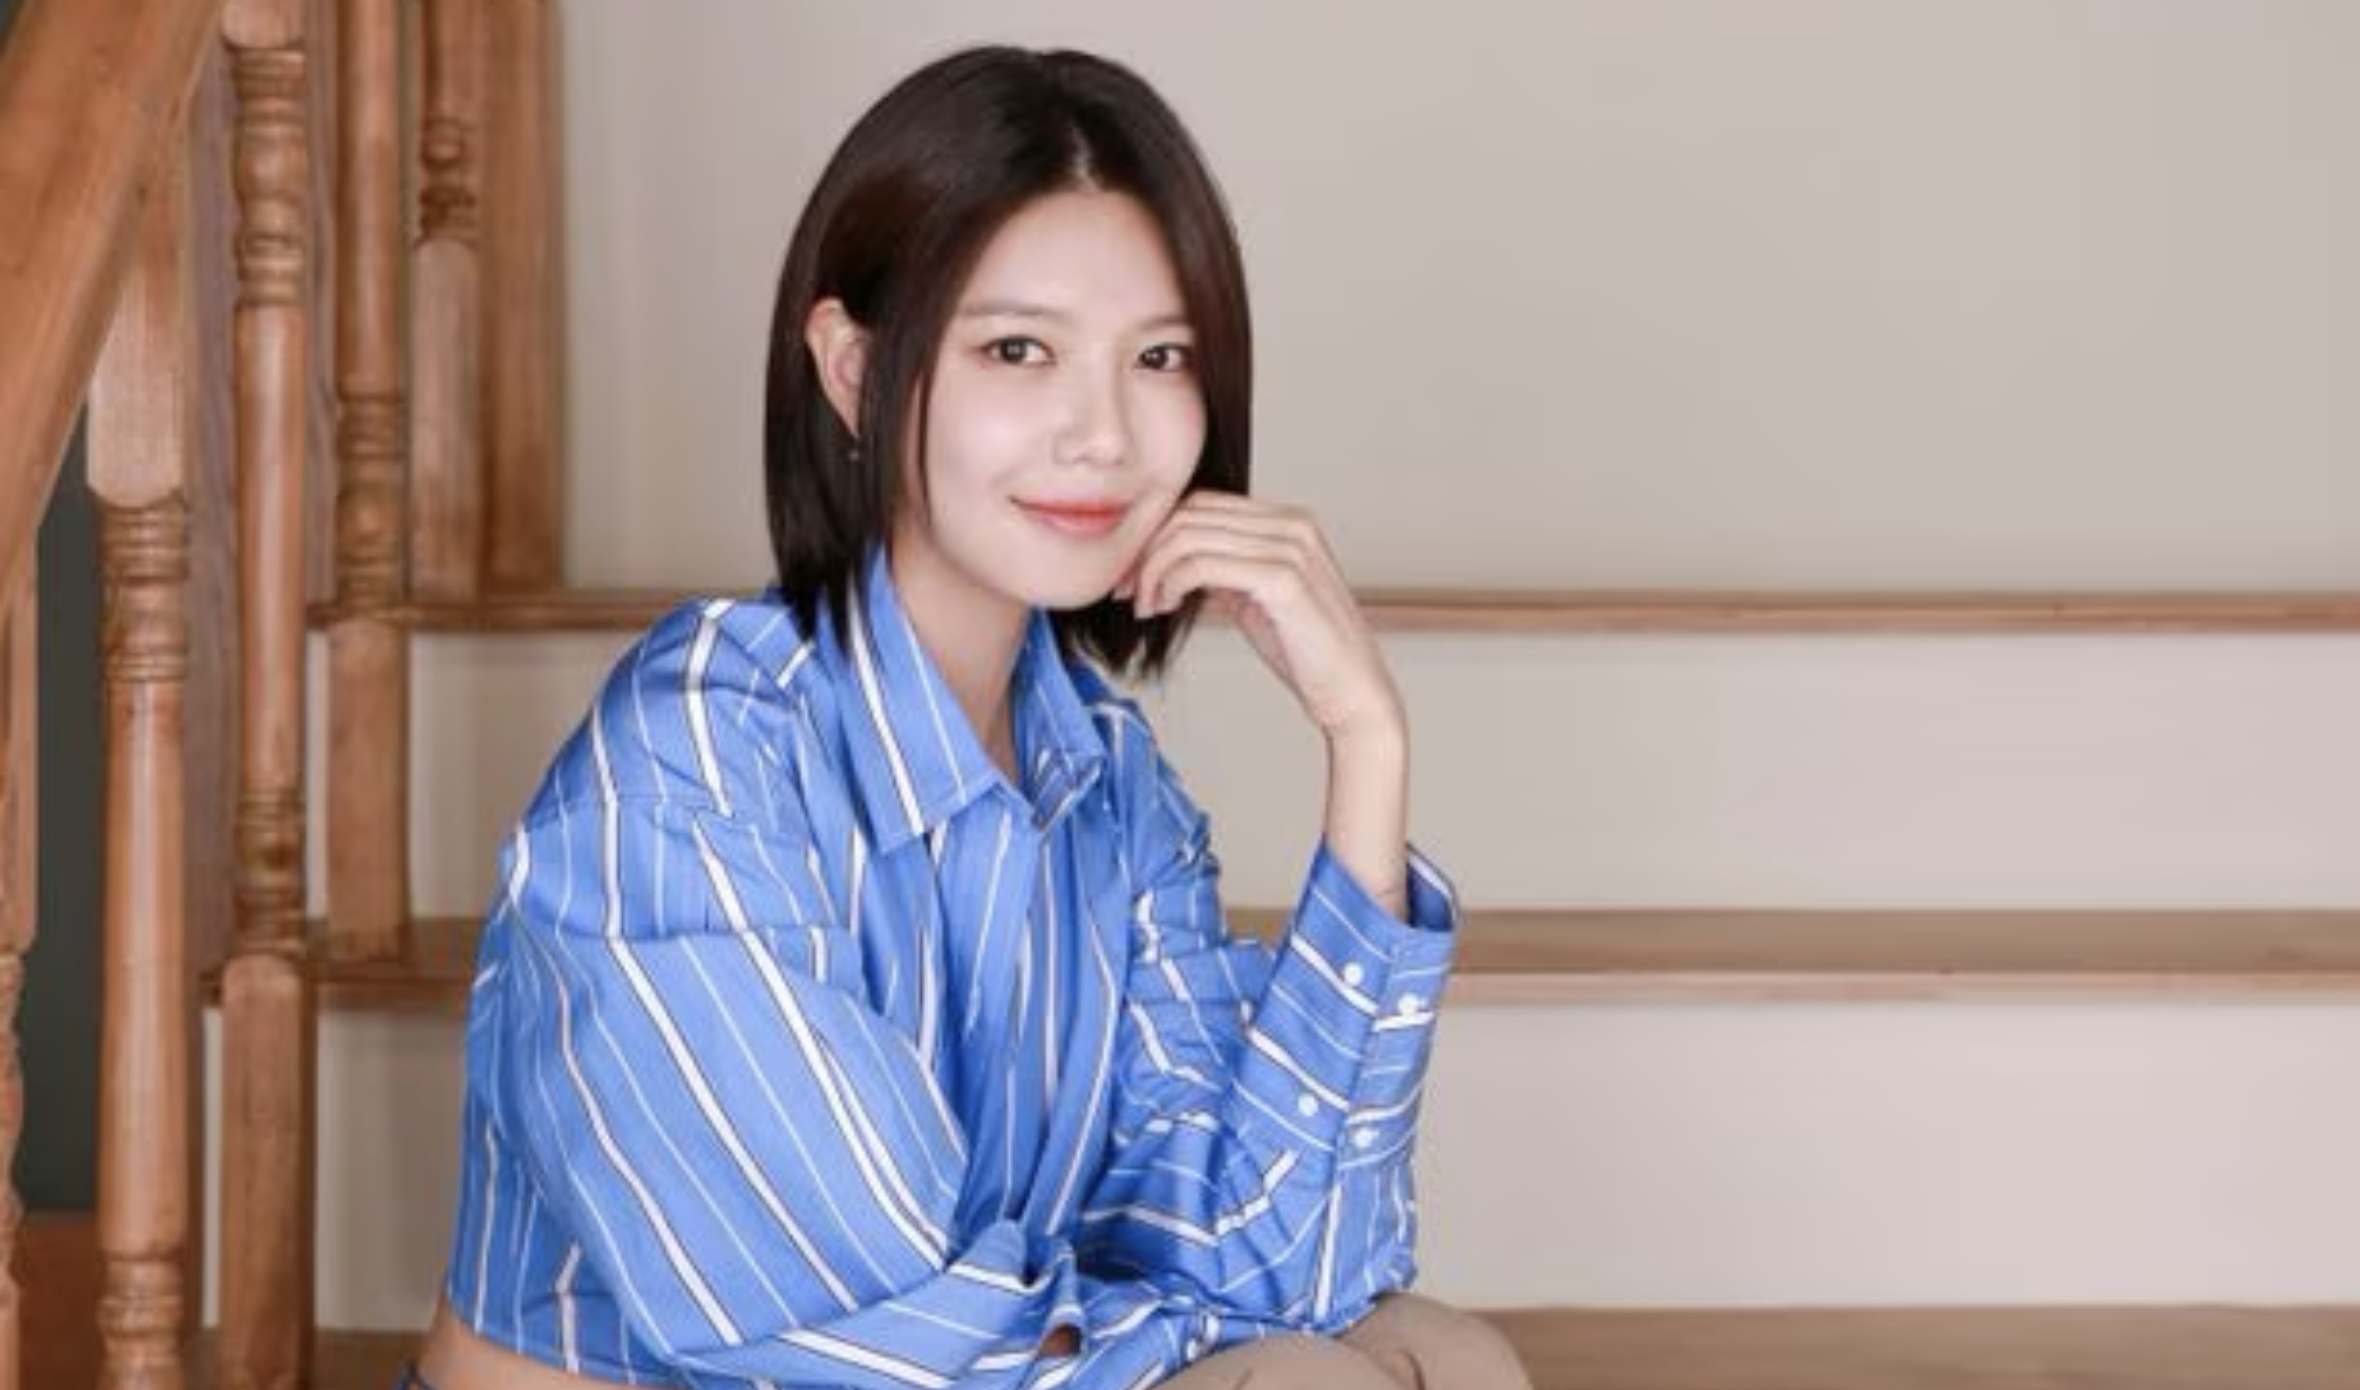 Sooyoung reflects on her career move from GIRLS GENERATION member to acting in numerous successful films and TV shows